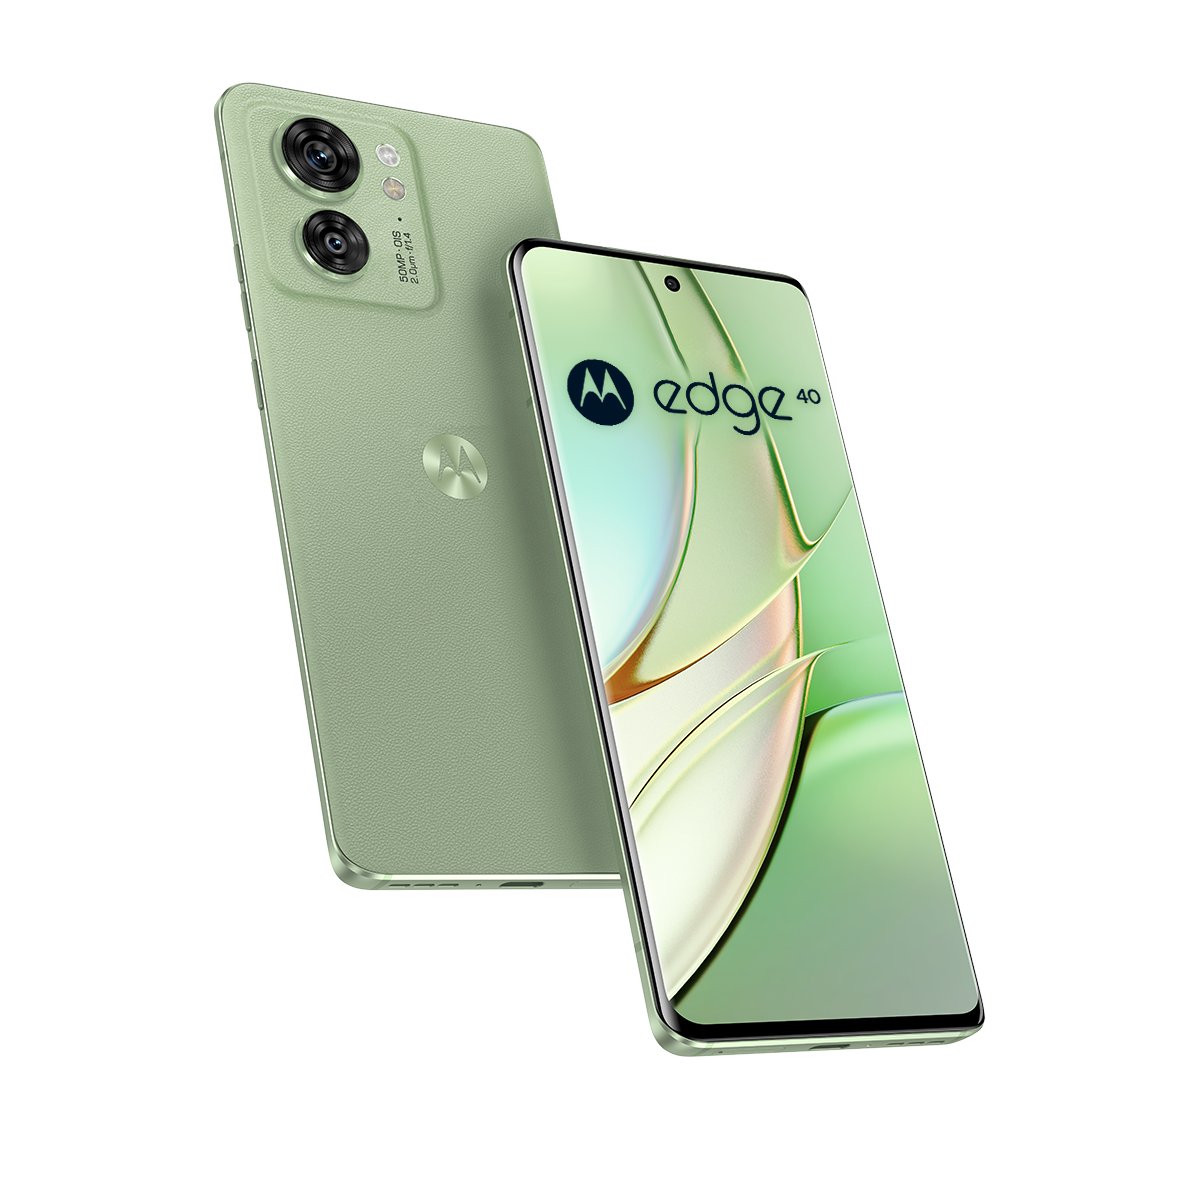 Today, I'm giving away the #MotorolaEdge40 to the #stufflistingsarmy 😍
To win:
1. Like this tweet
2. Retweet this tweet using #MotorolaEdge40giveaway #WinMotorolaEdge40
3. Answer some questions
Happy winning ❤️